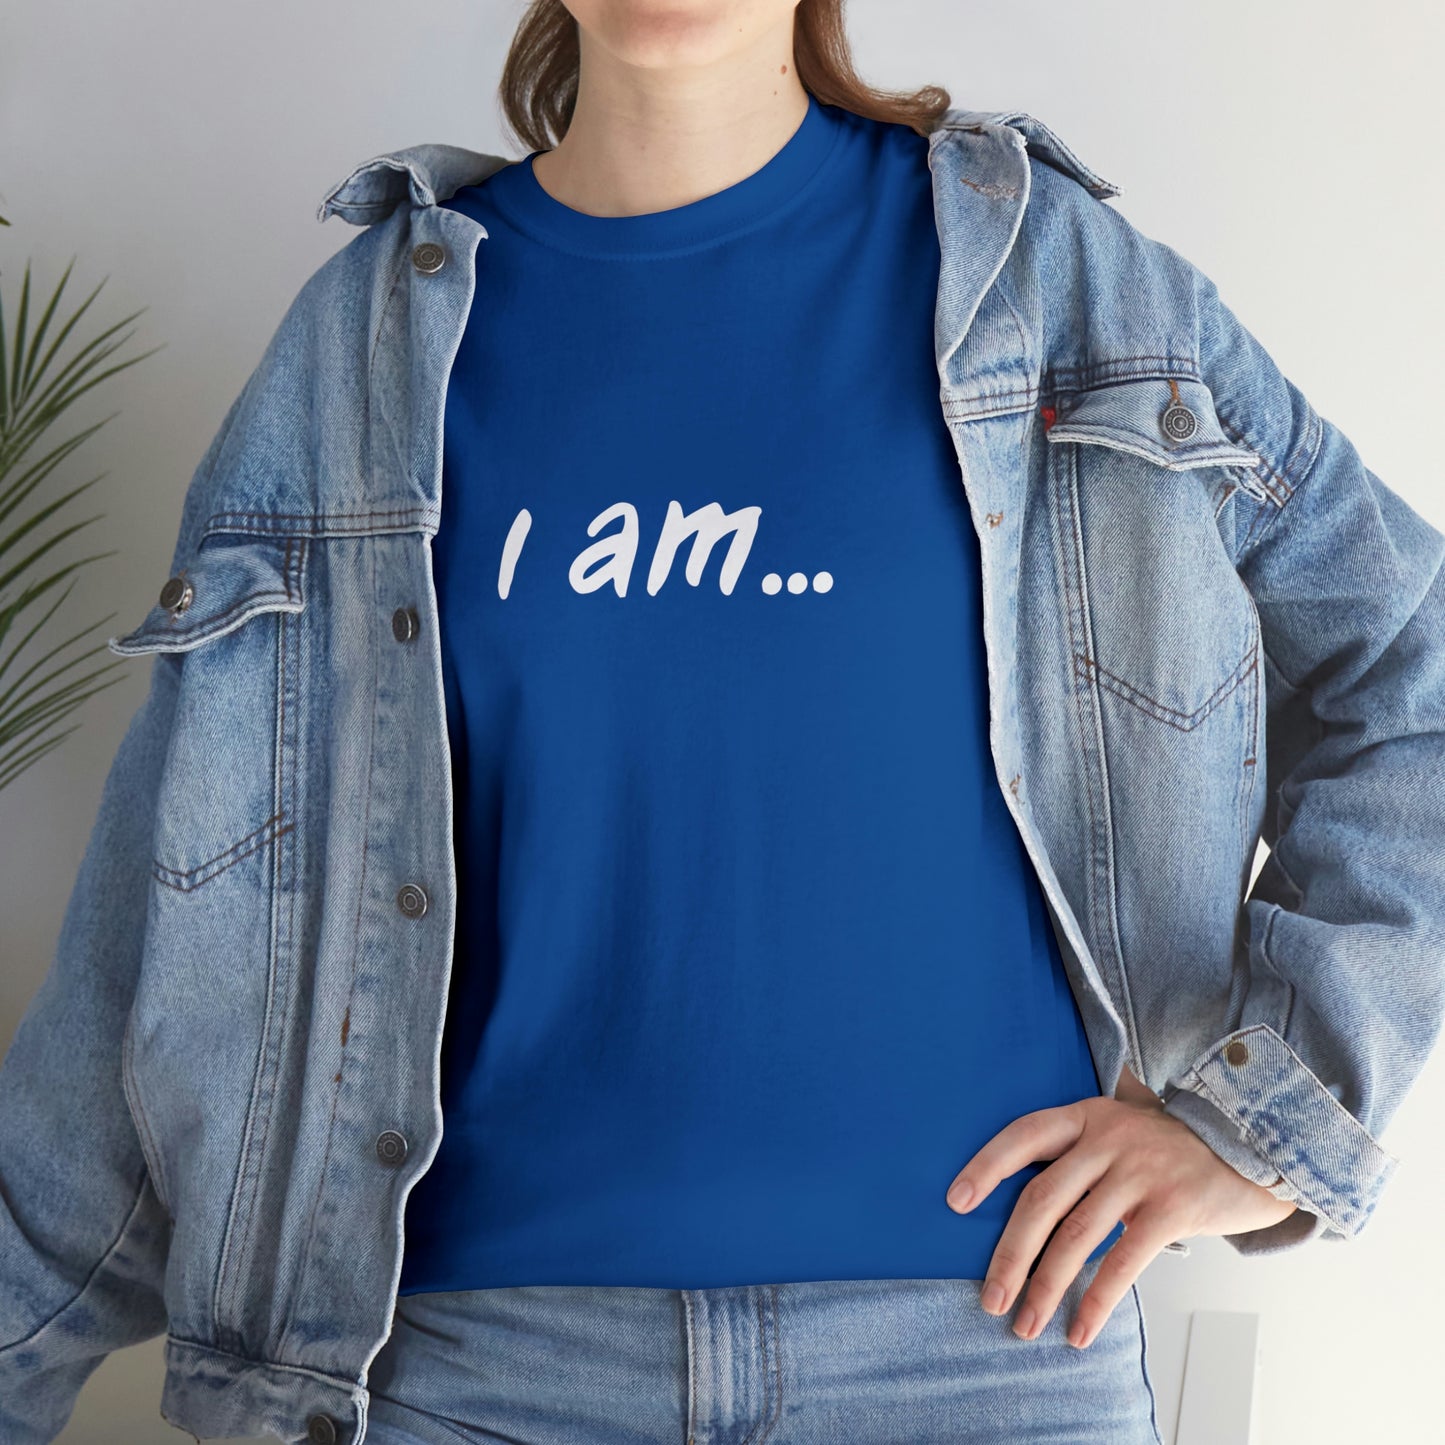 'I am...fisher people'. - Unisex Heavy Cotton Tee